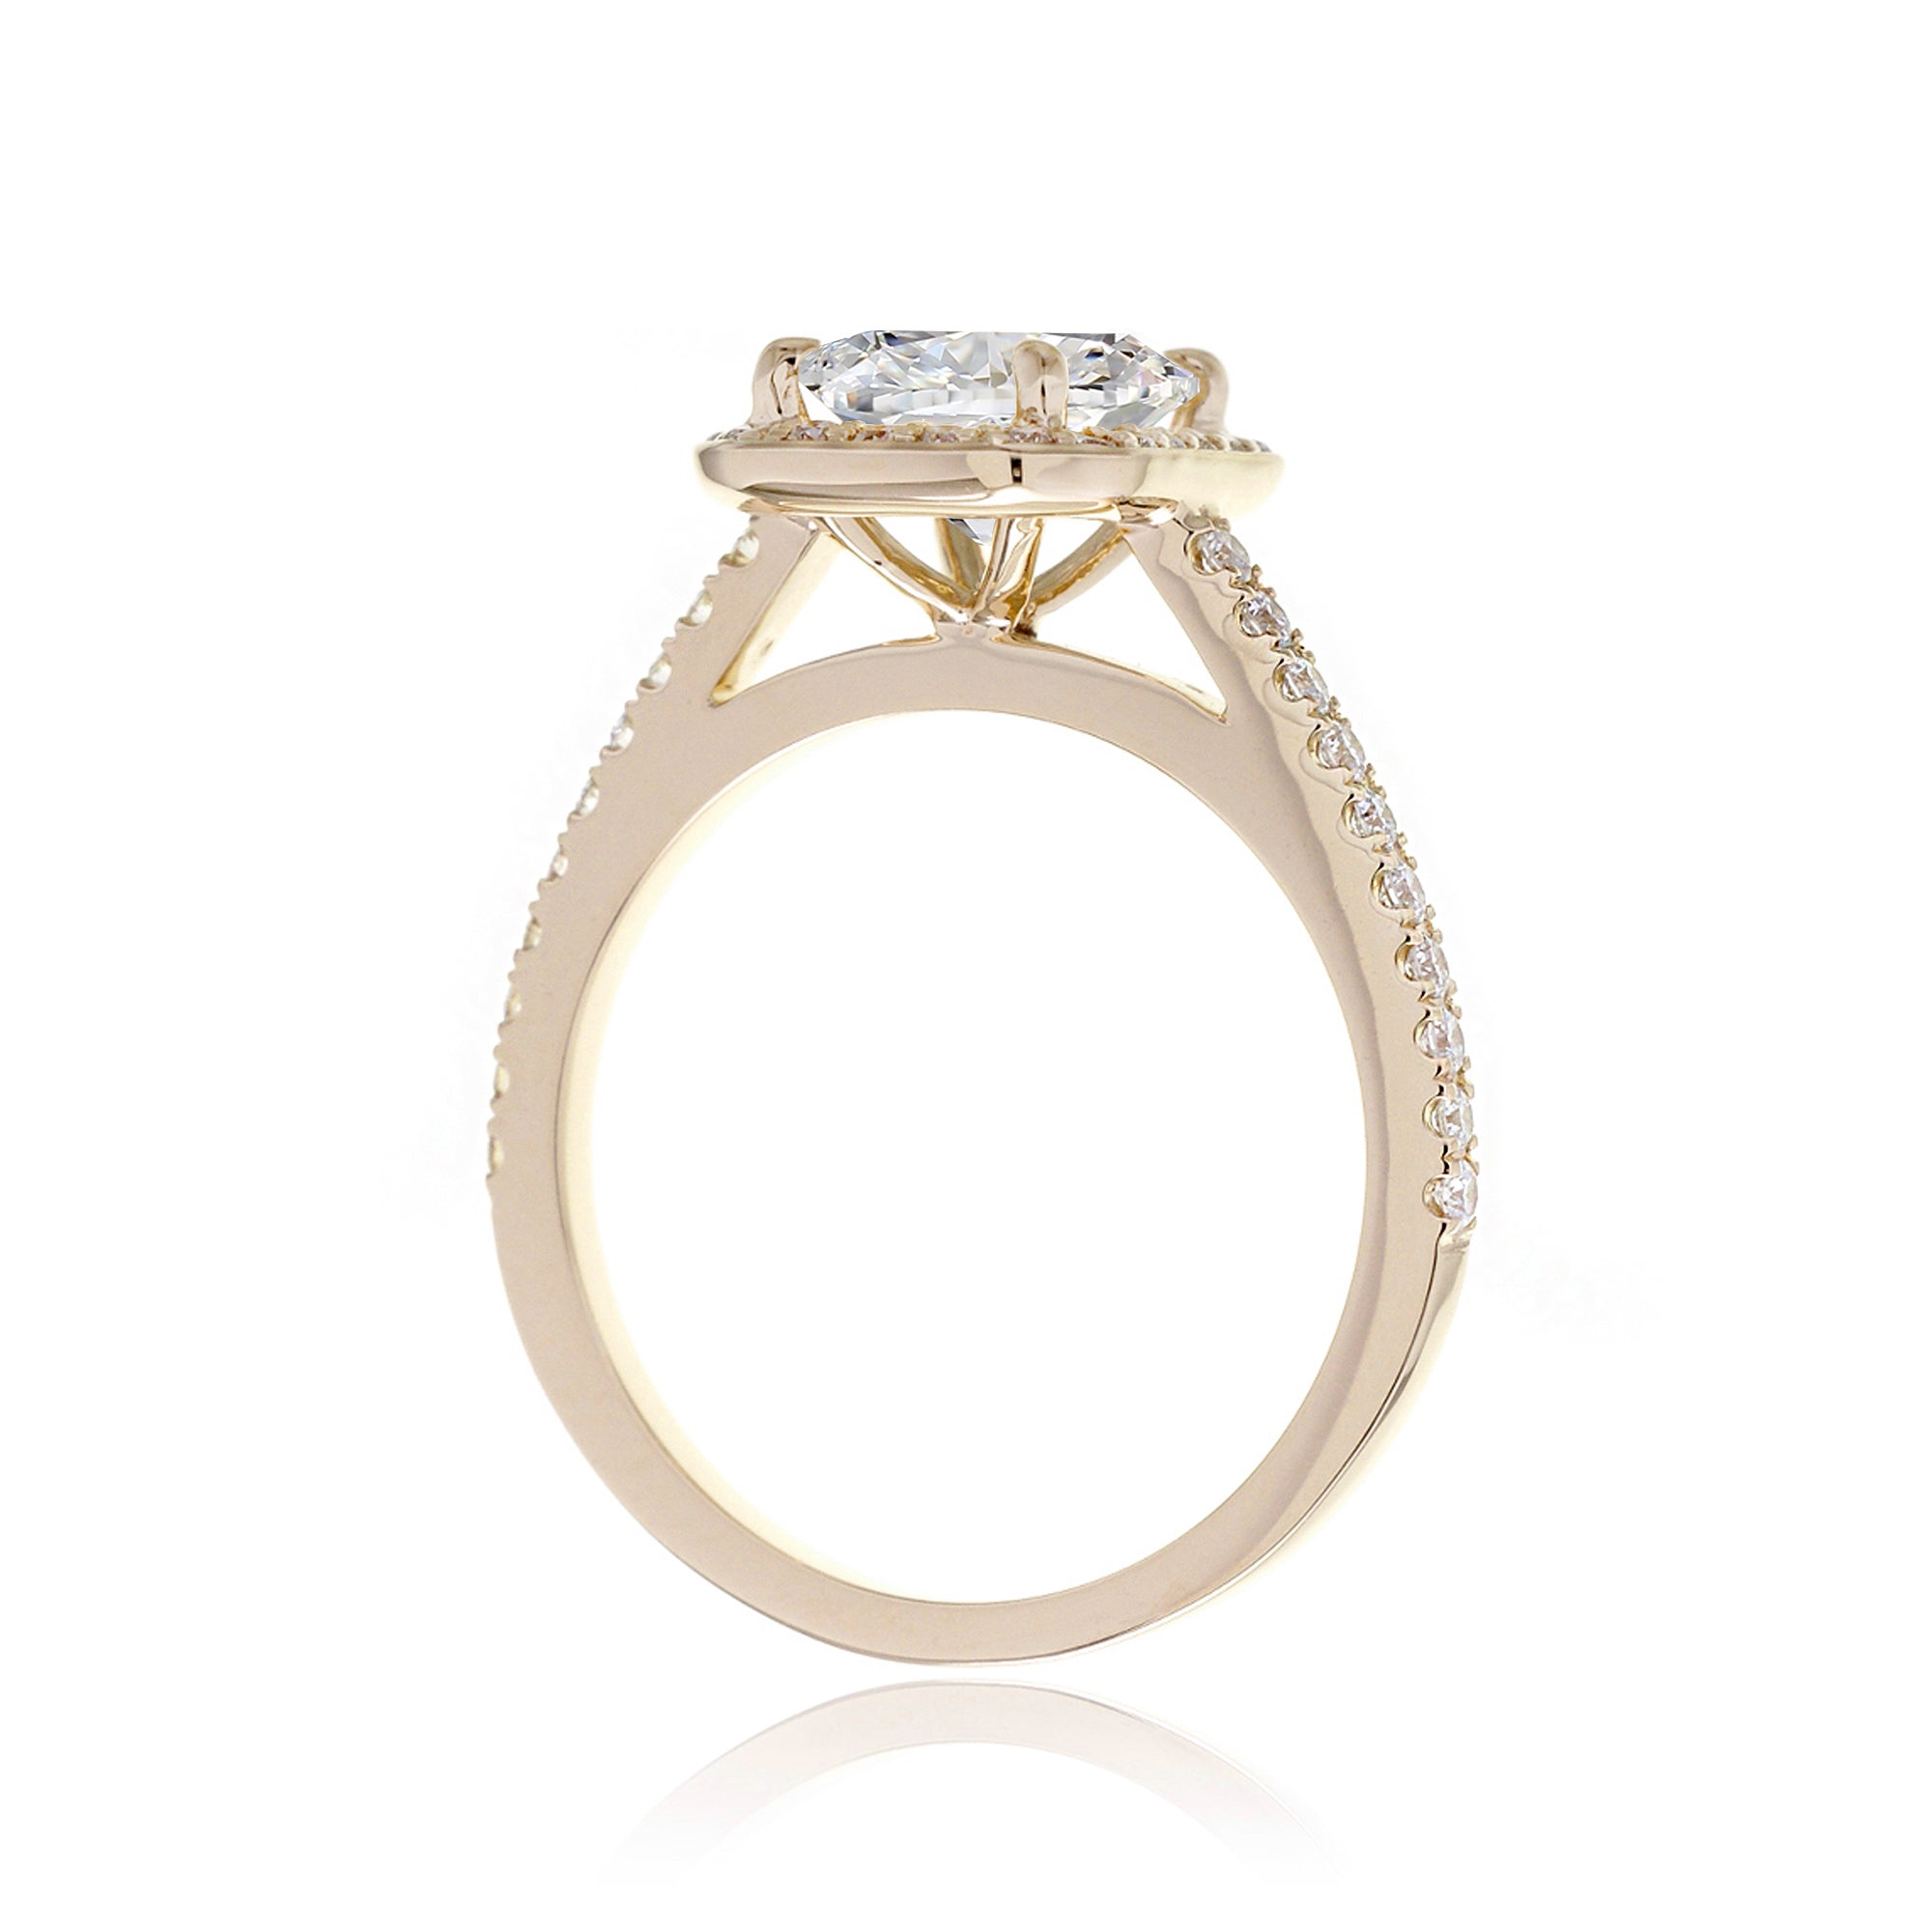 Cushion lab-grown diamond halo cathedral engagement ring - the Steffy yellow gold